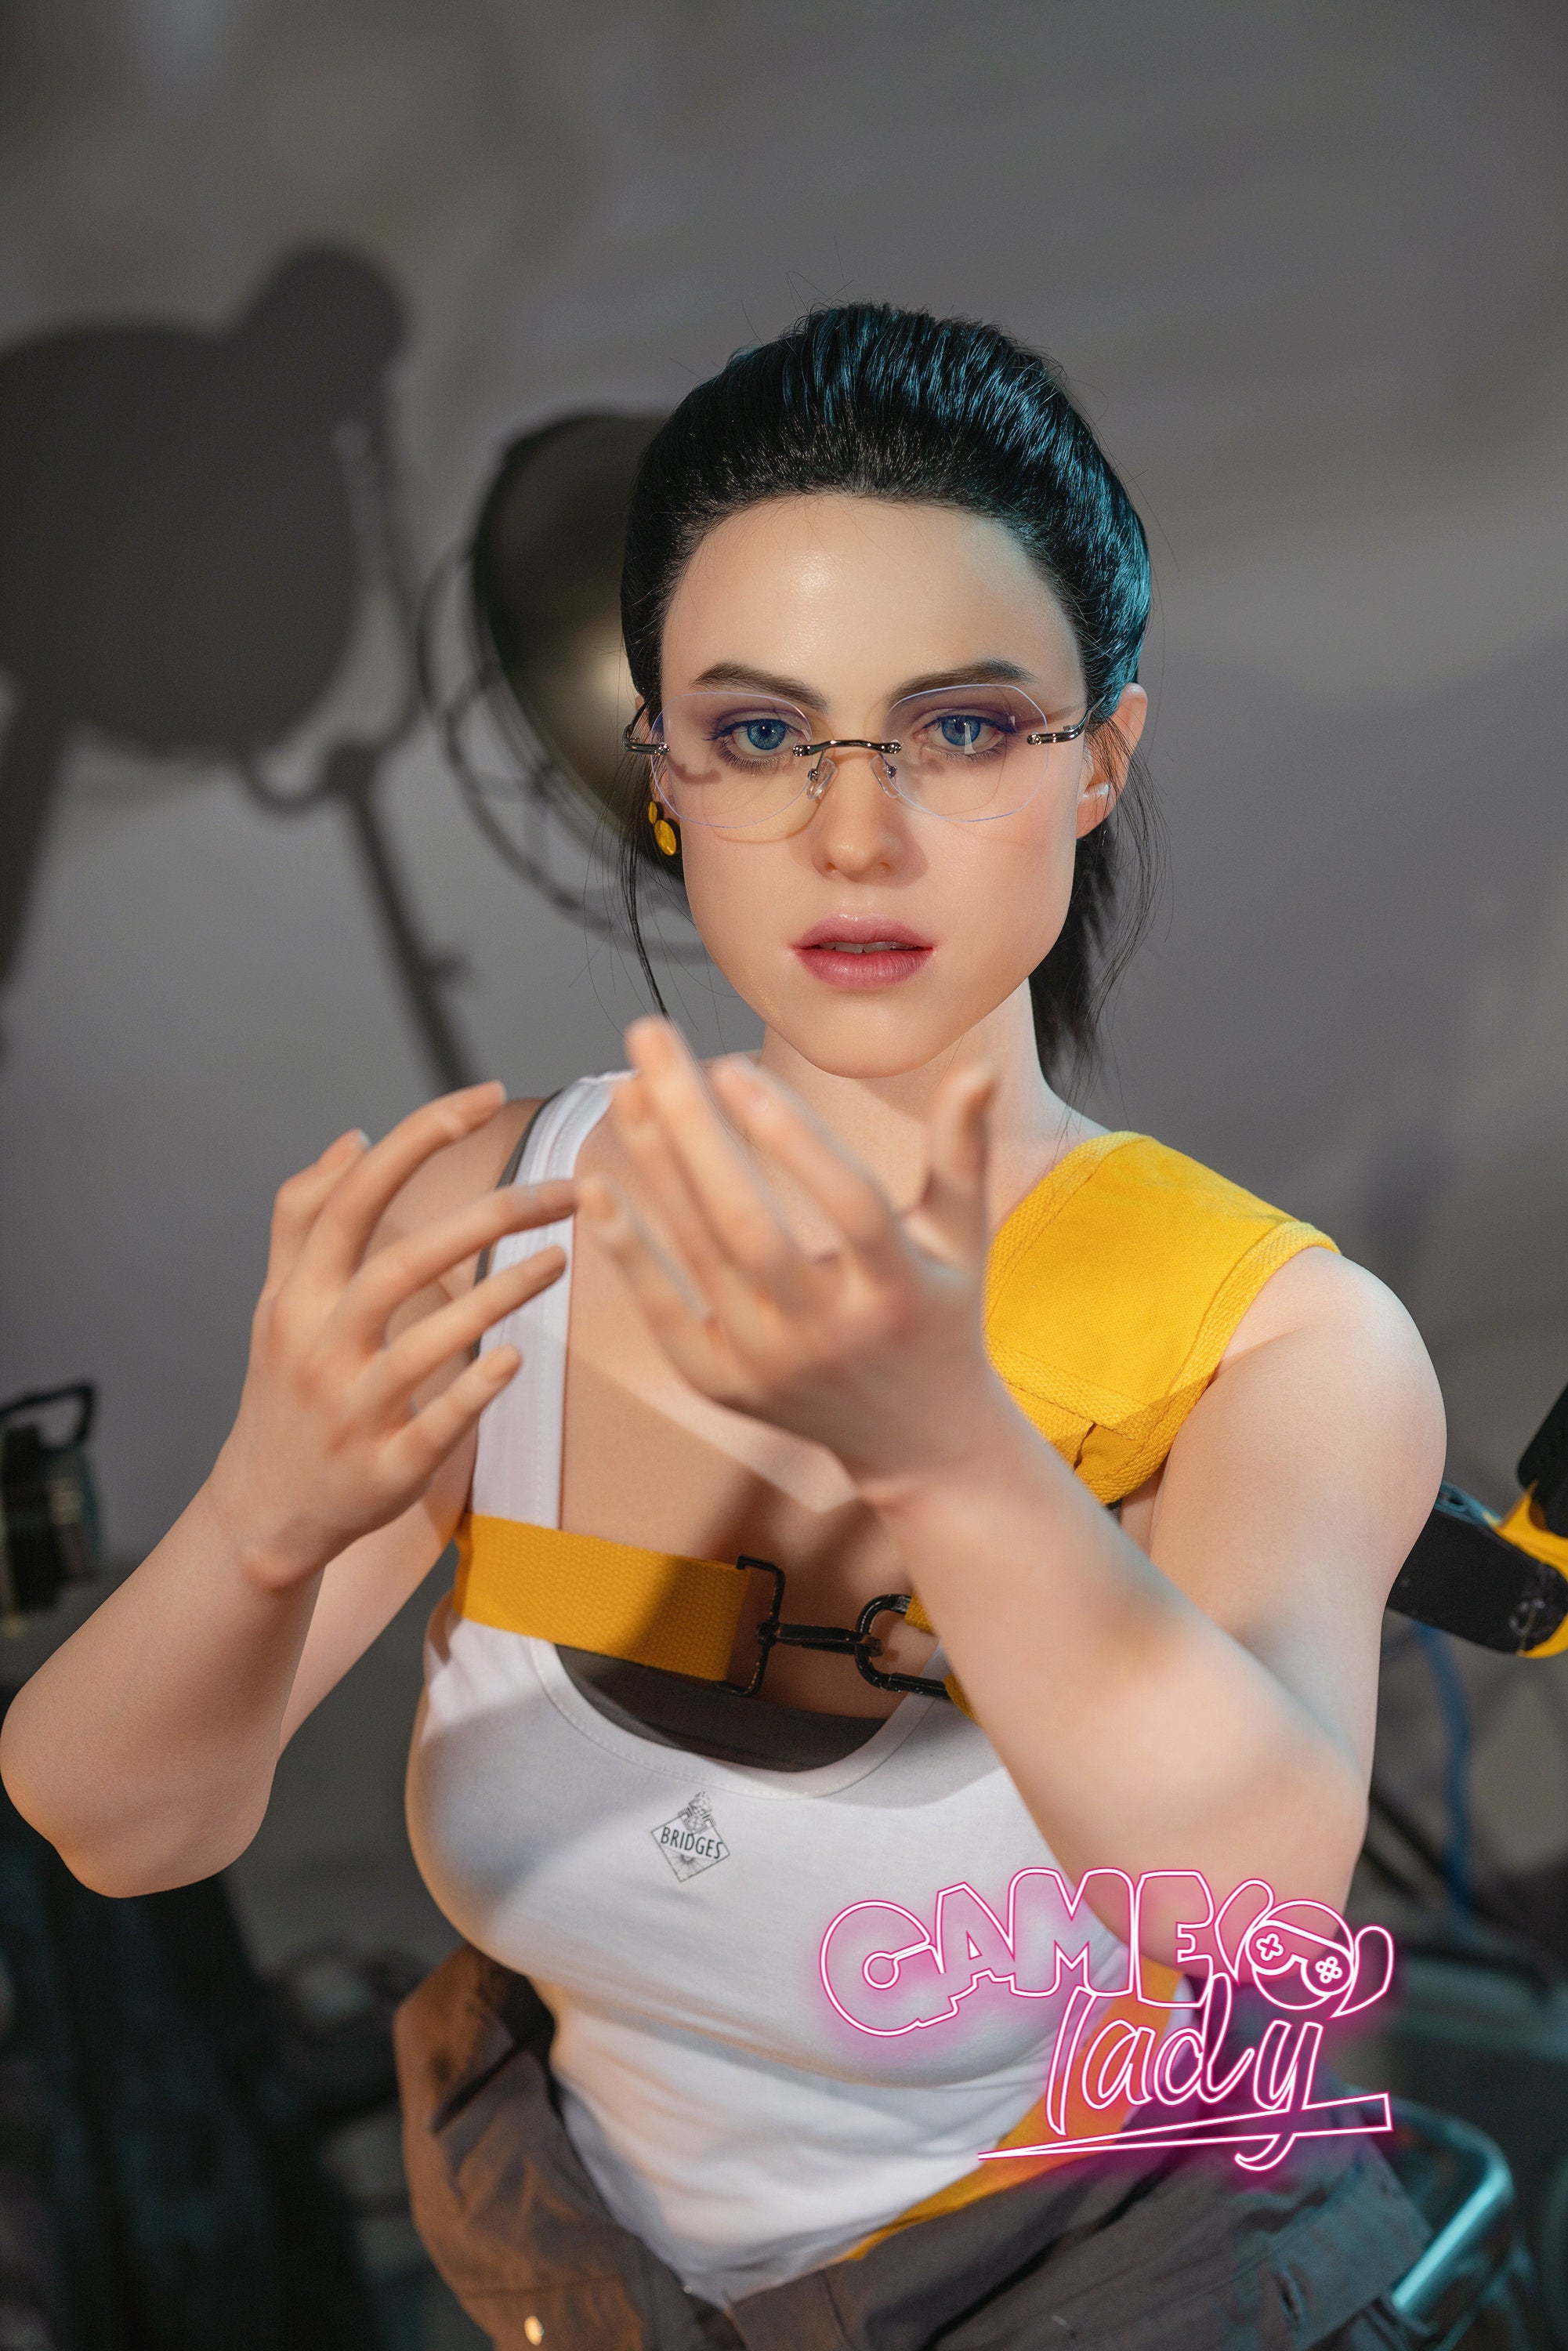 Game Lady 168 cm Silicone - Mama | Buy Sex Dolls at DOLLS ACTUALLY